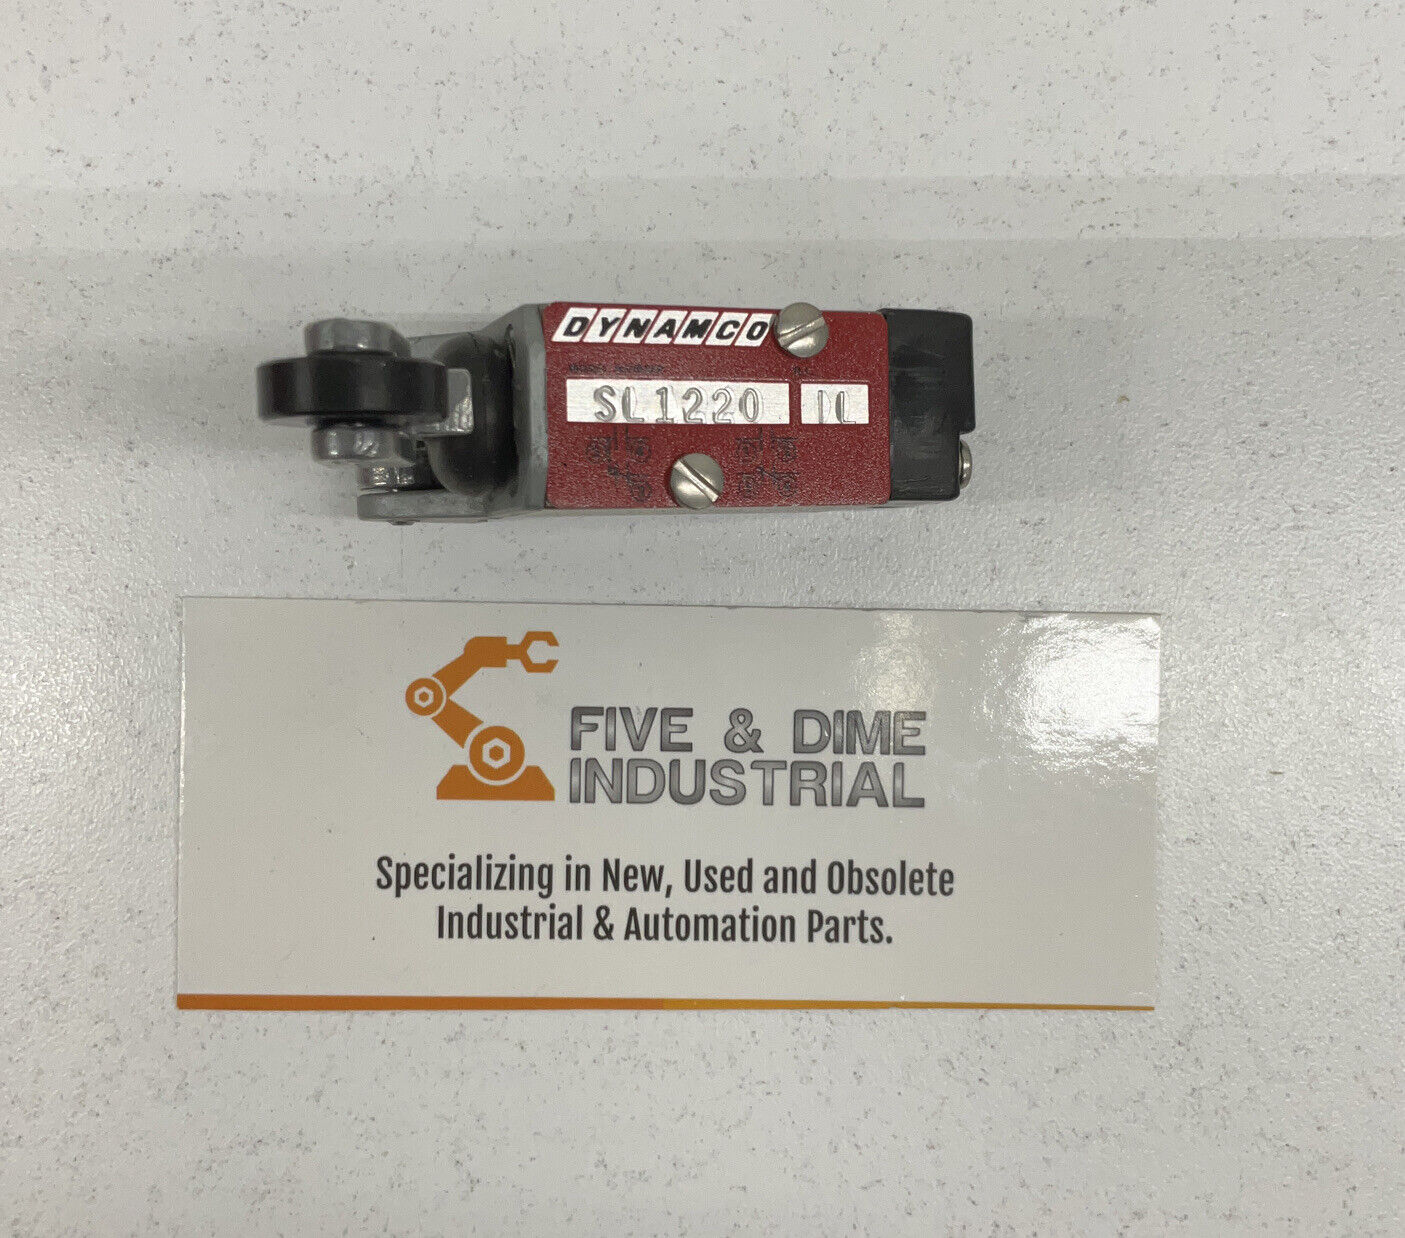 Dynamco SL1220 FK Roller Lever Actuated Pneumatic Limit Switch (RE132) - 0